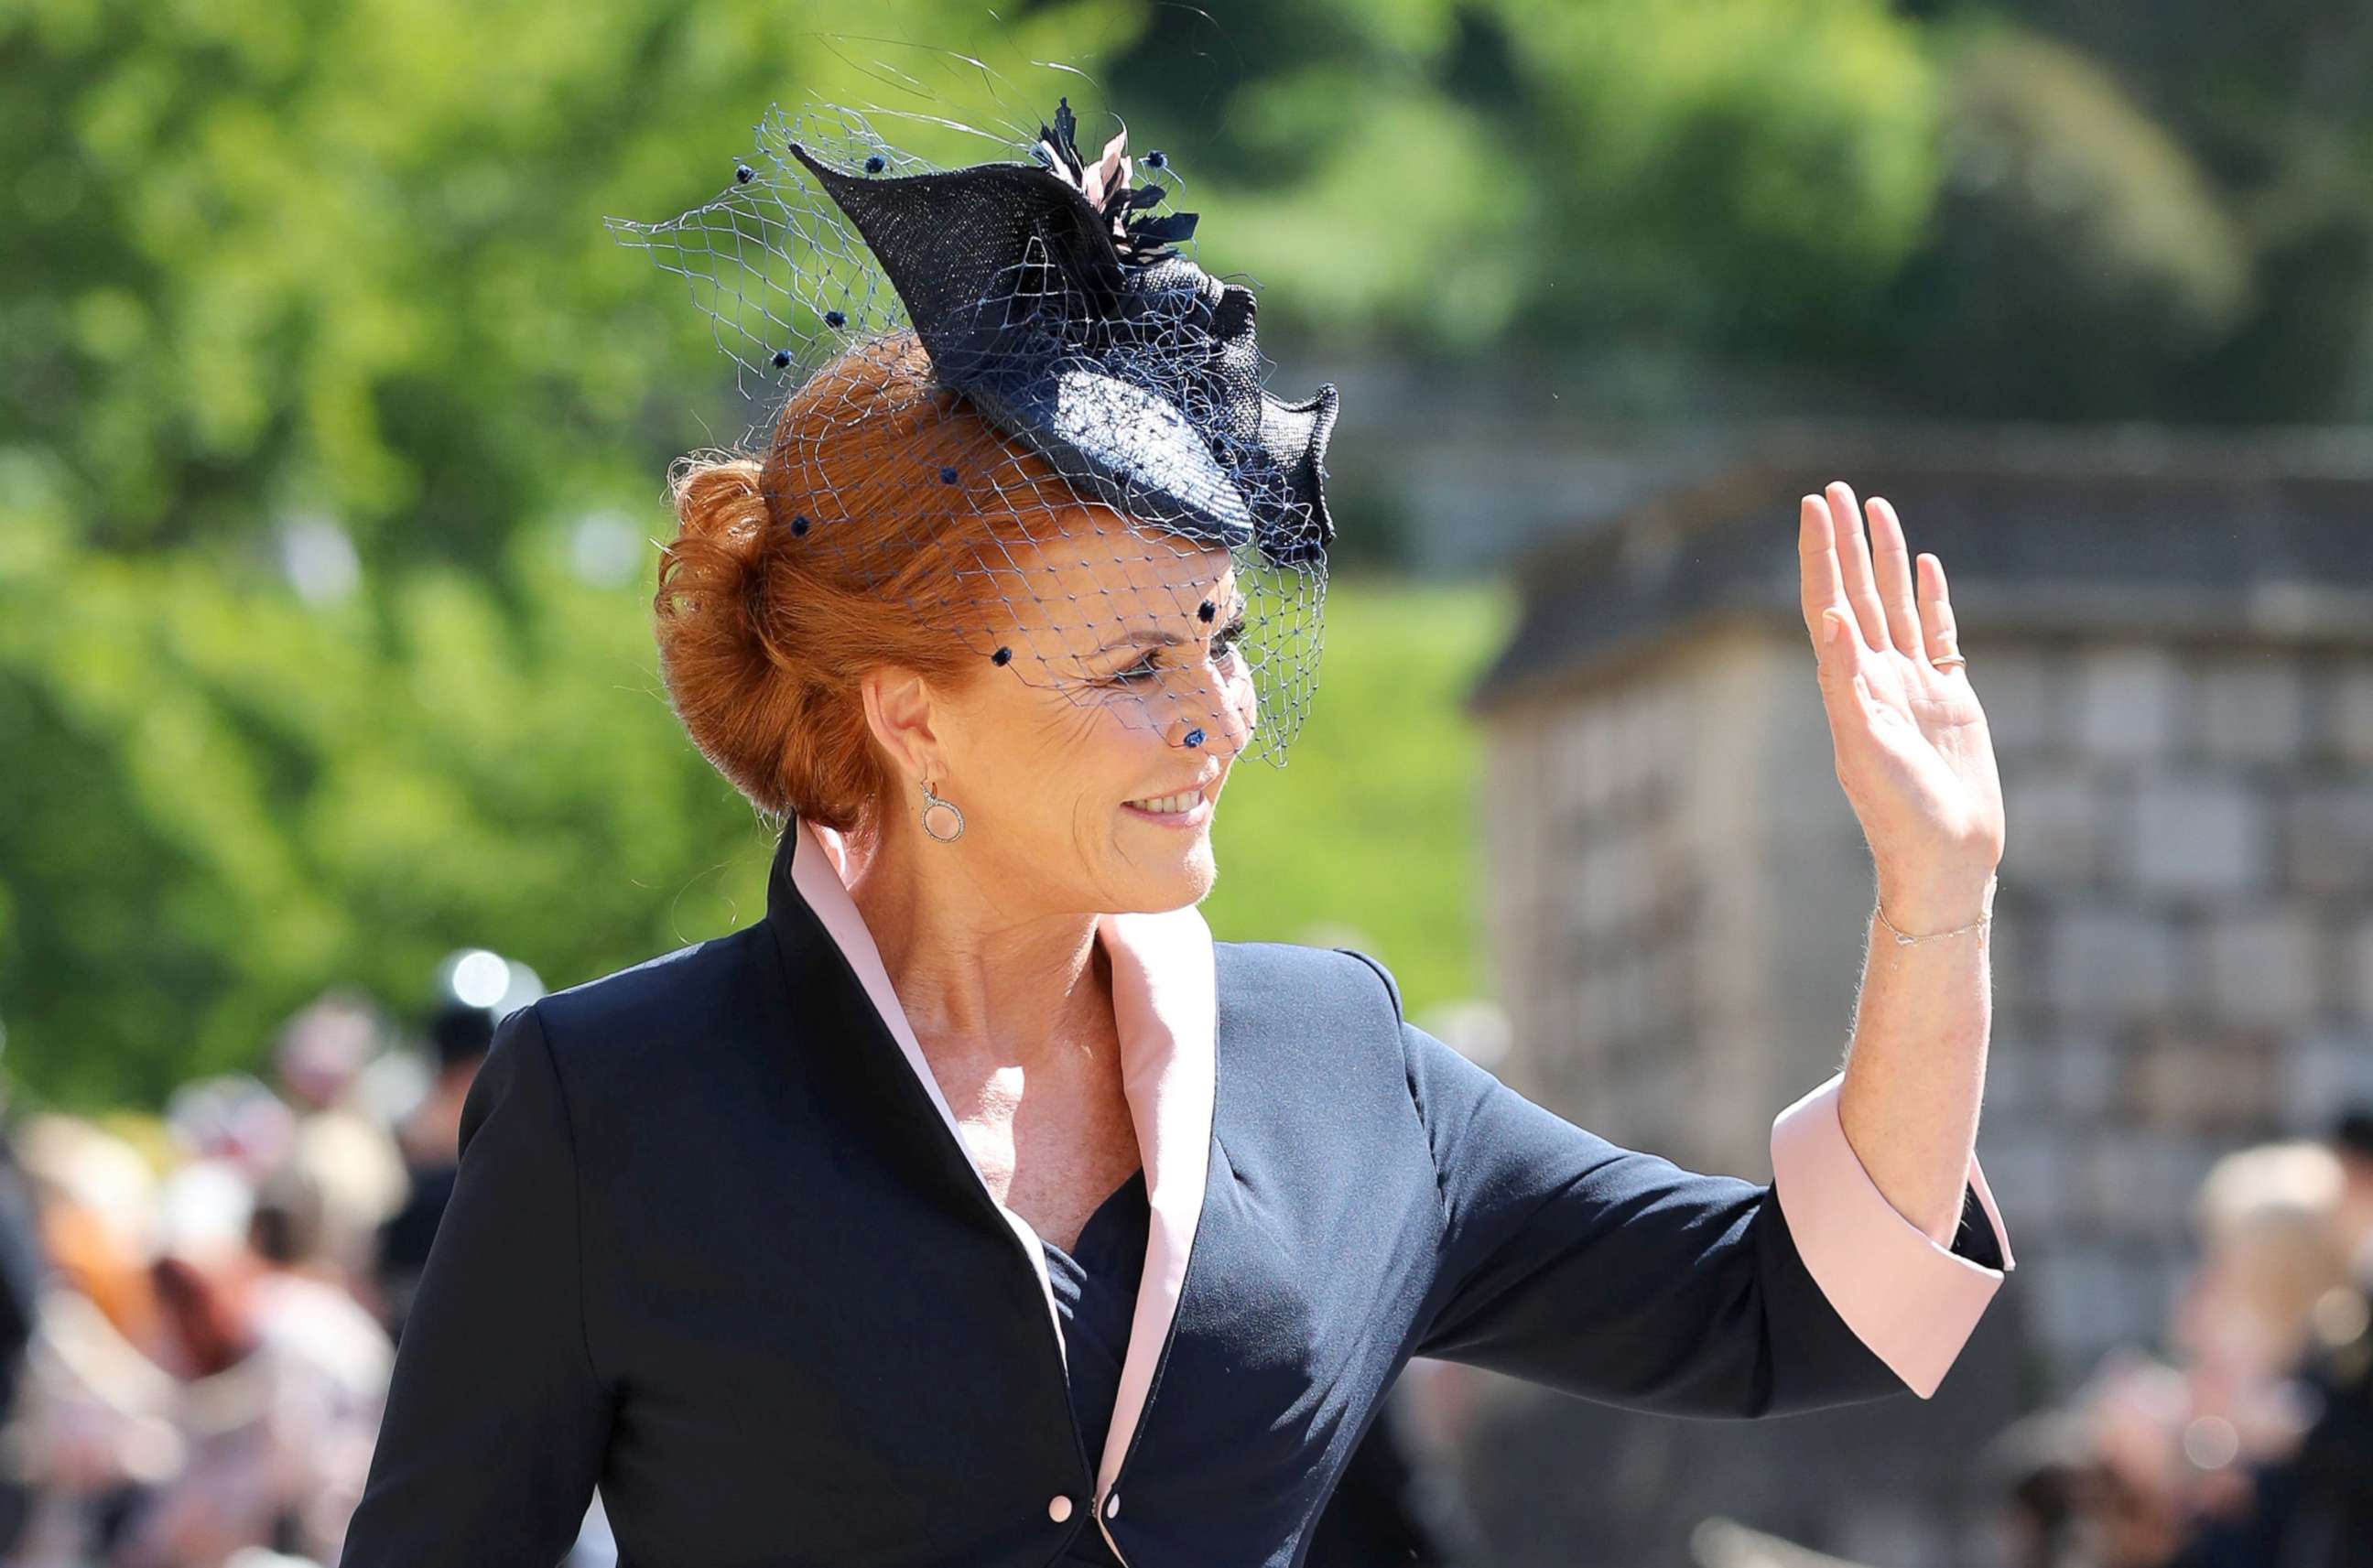 PHOTO: Sarah, Duchess of York arrives at St George's Chapel at Windsor Castle for the wedding of Meghan Markle and Prince Harry in Windsor, May 19, 2018.